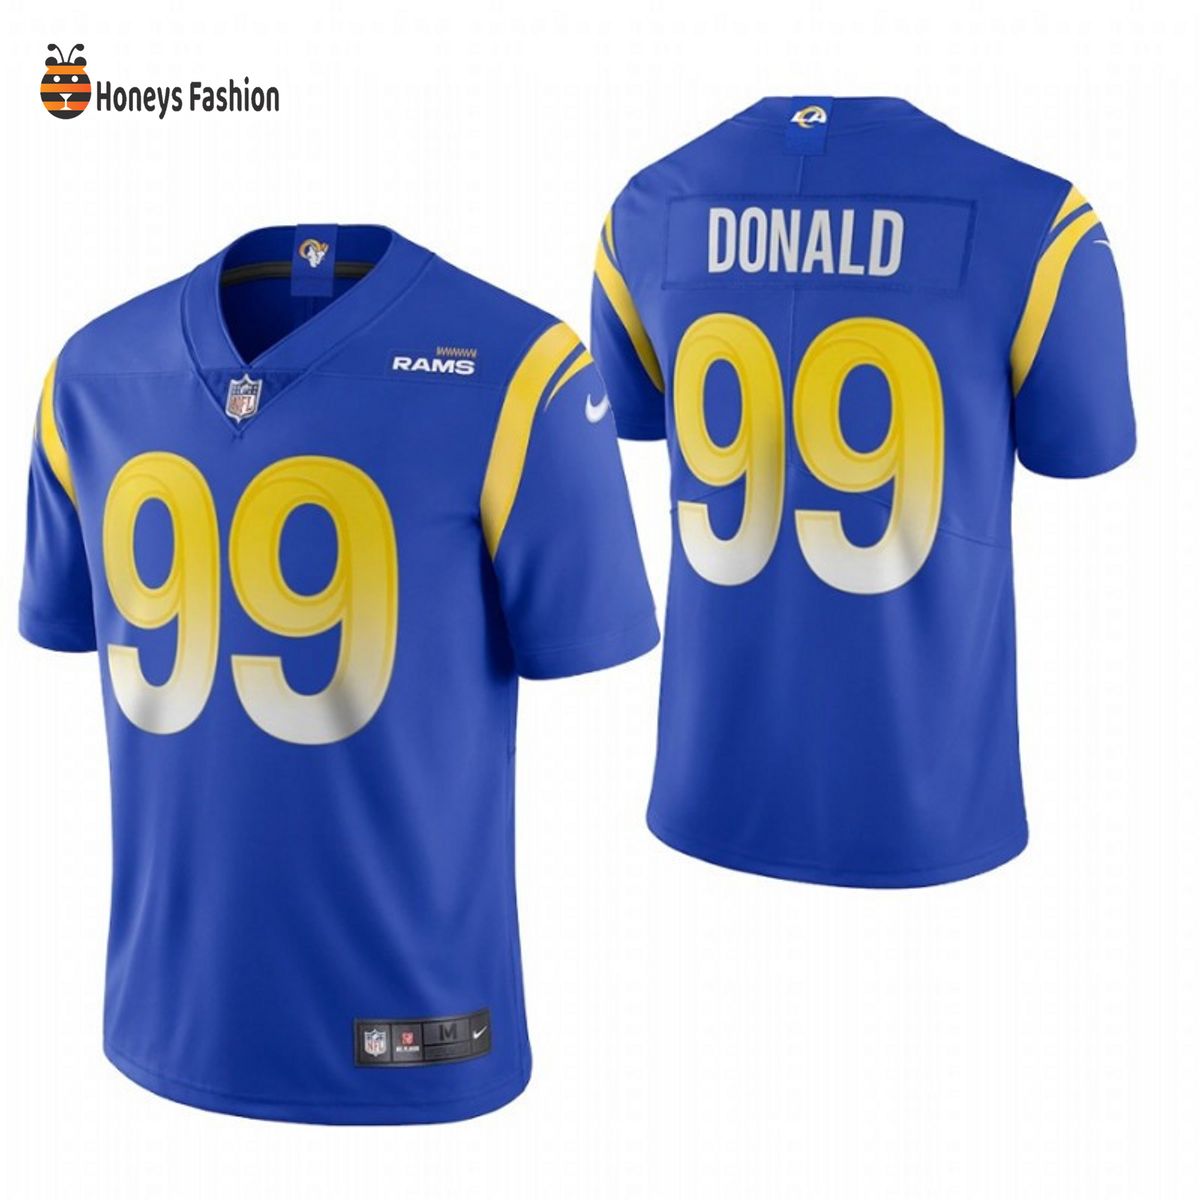 Aaron Donald Number 99 Los Angeles Rams Royal 2020 Vapor Limited Jersey